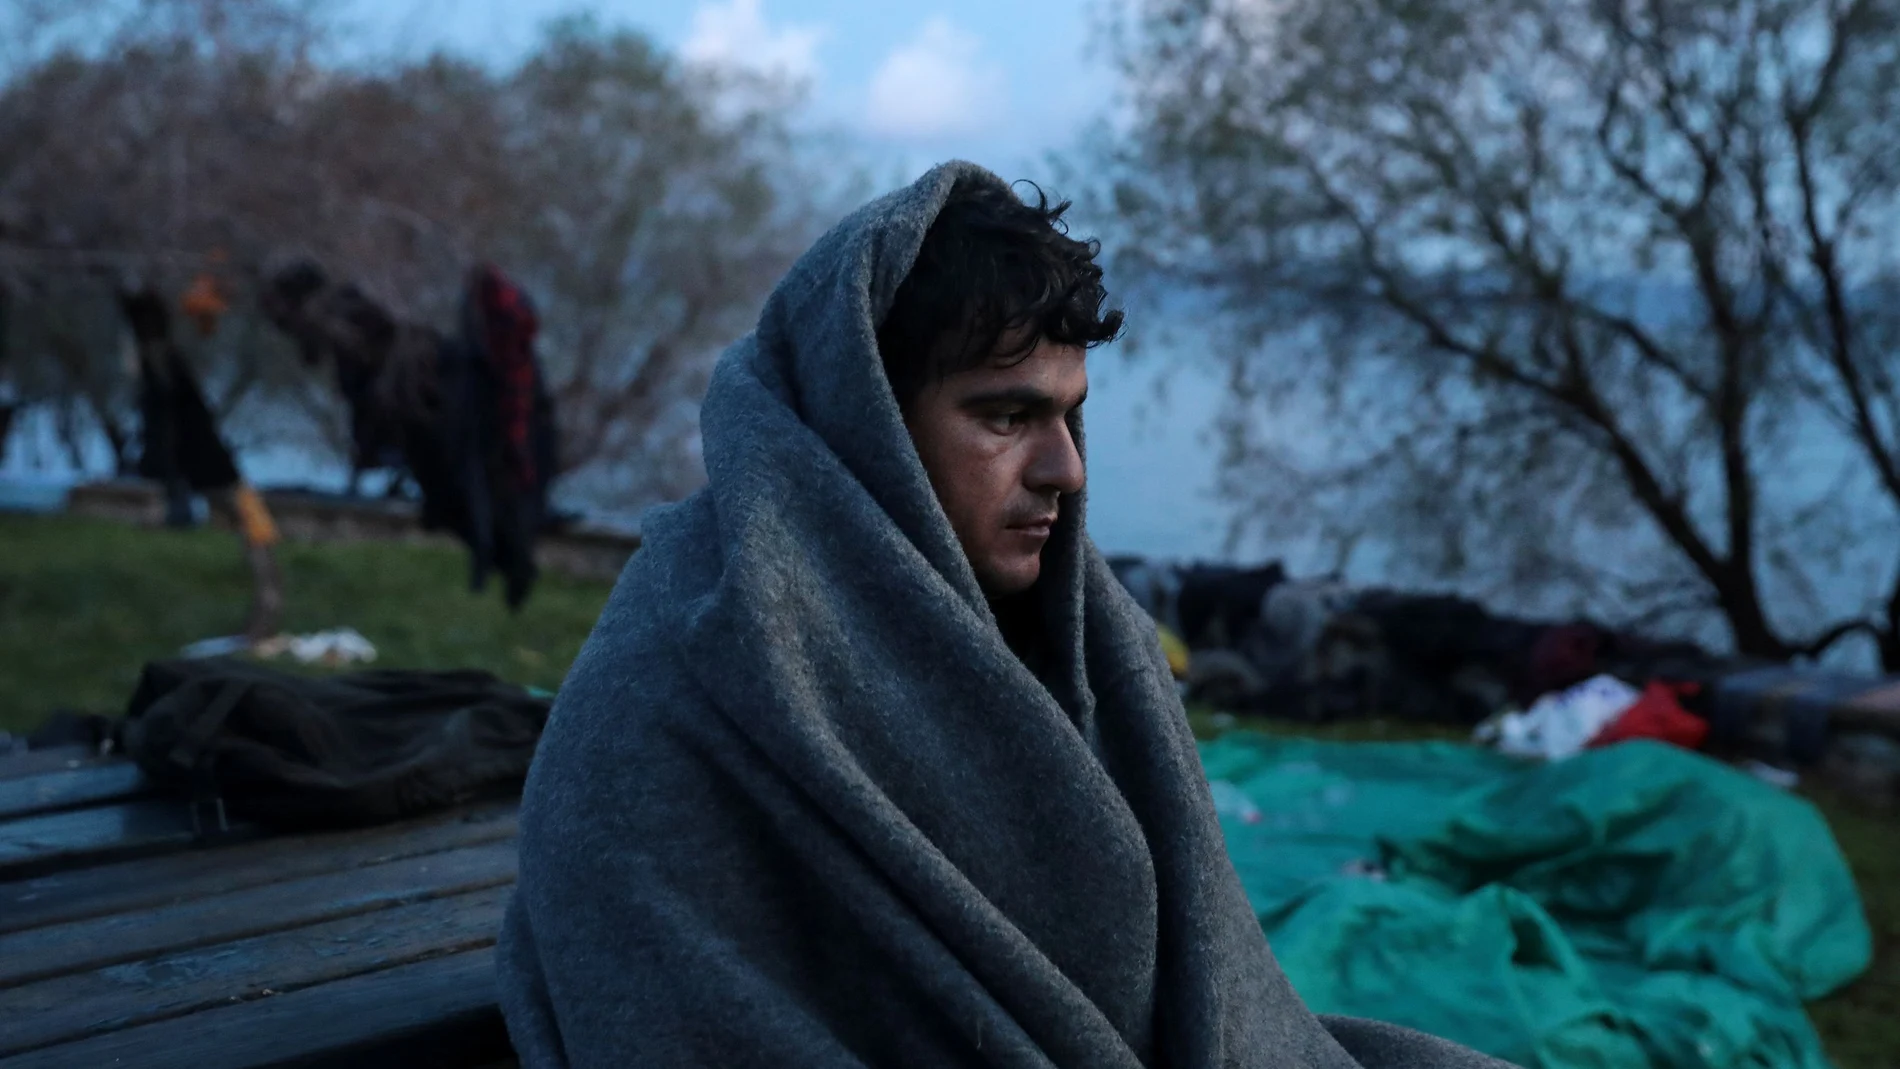 A migrant, who arrived the previous day on a dinghy after crossing part of the Aegean Sea from Turkey, is covered with a blanket near the village of Skala Sikamias, on the island of Lesbos